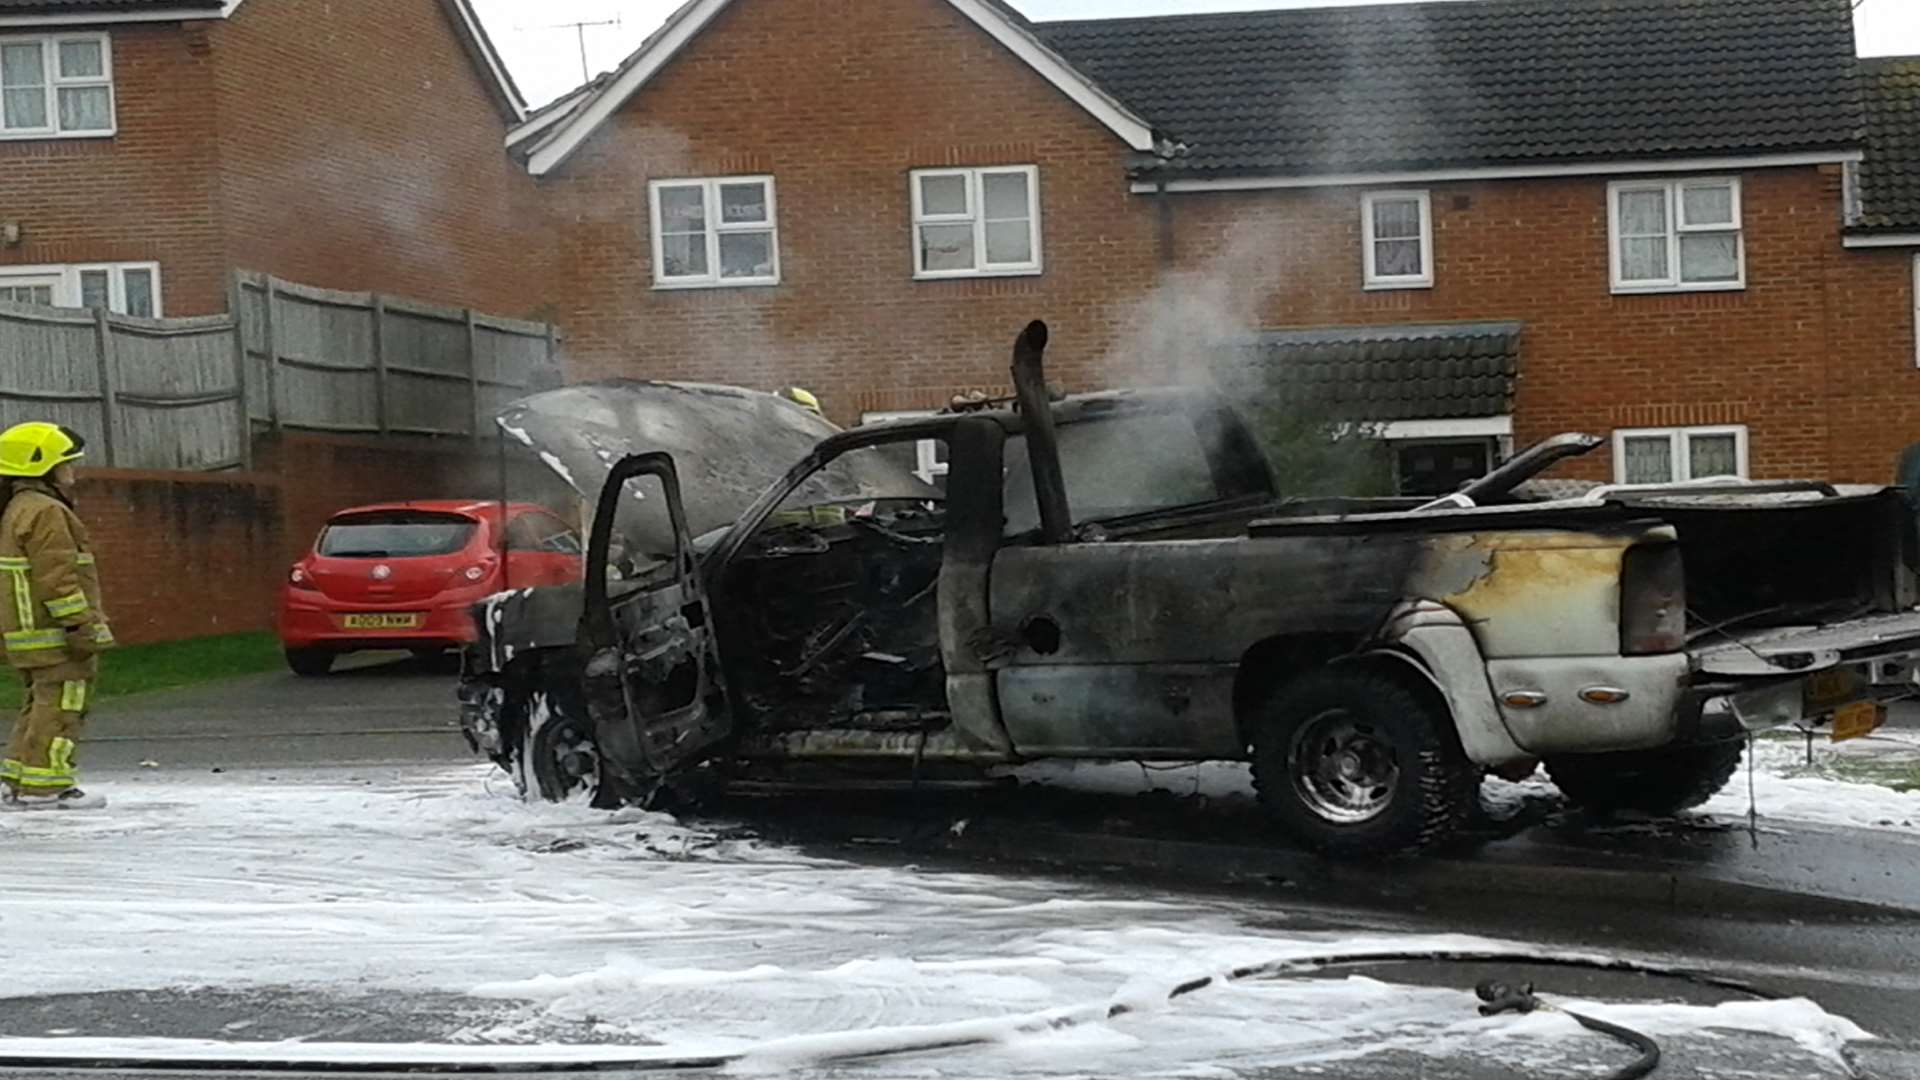 A pick-up truck was destroyed in a blaze in Ashford. Picture: Emma Morris